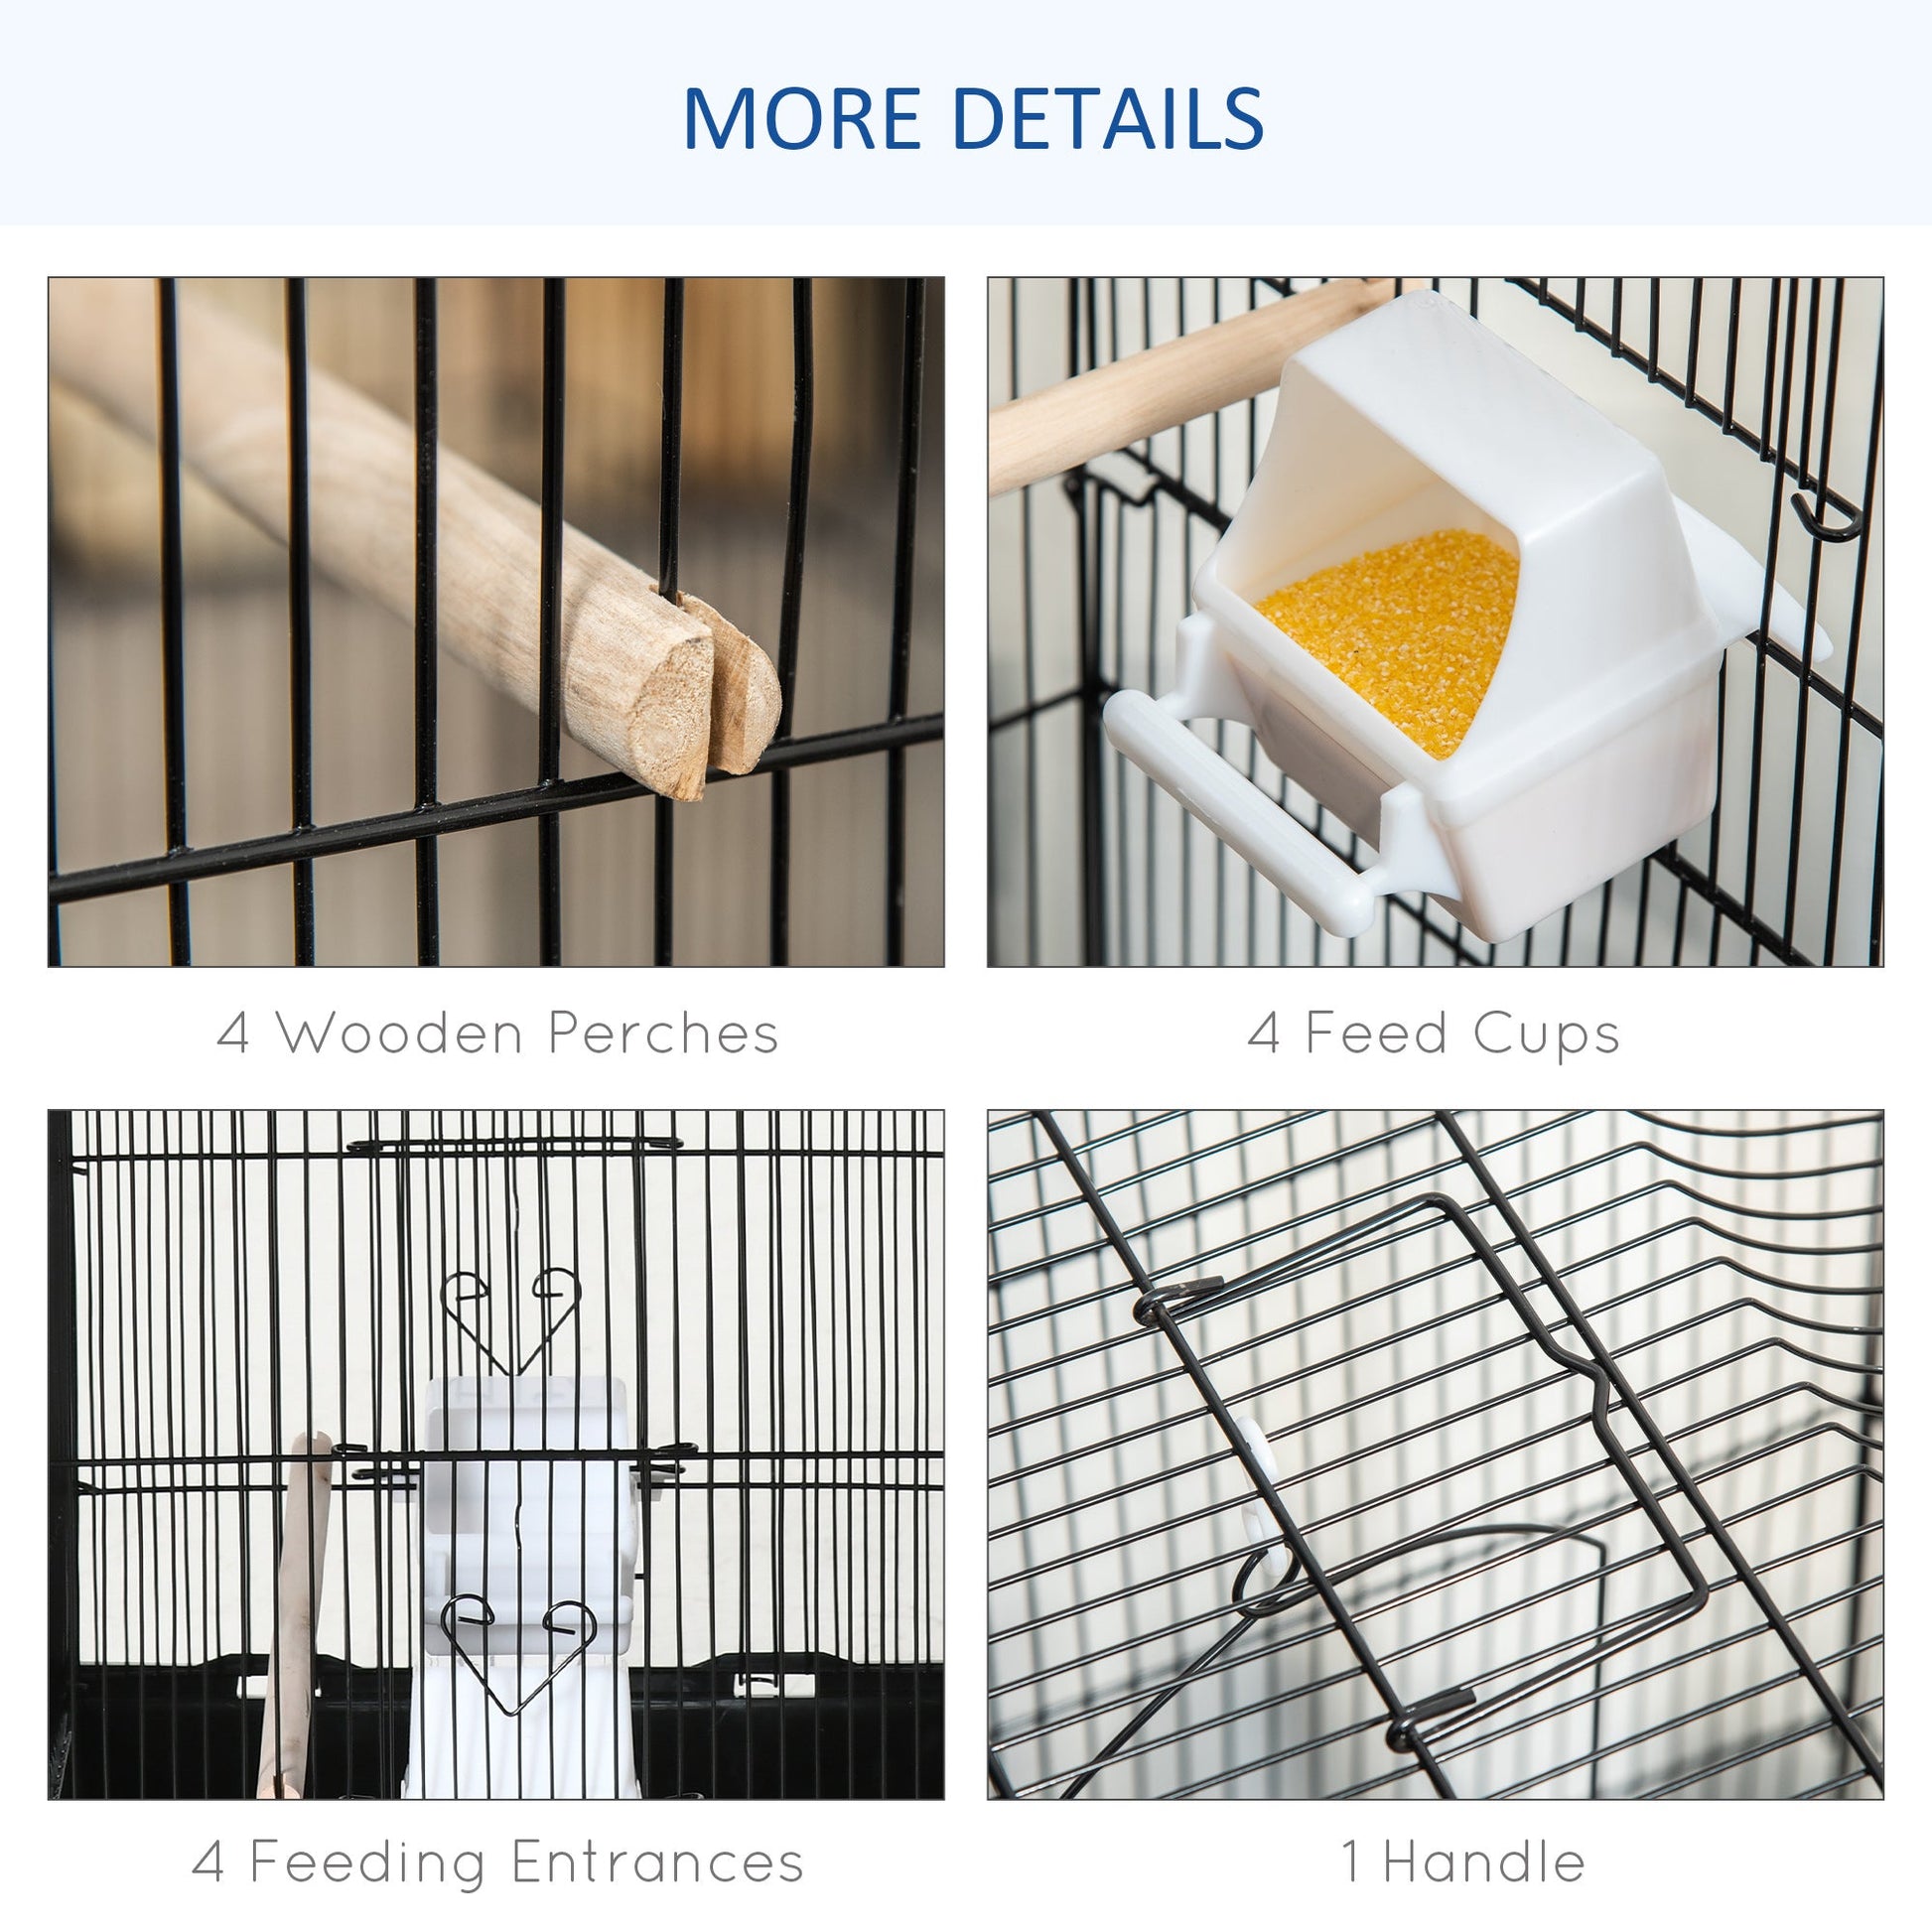 36" Bird Cage, Macaw Play House, Cockatoo, Parrot, Finch Flight Cage, 2 Doors Perch, 4 Feeder Pet Supplies, Black at Gallery Canada